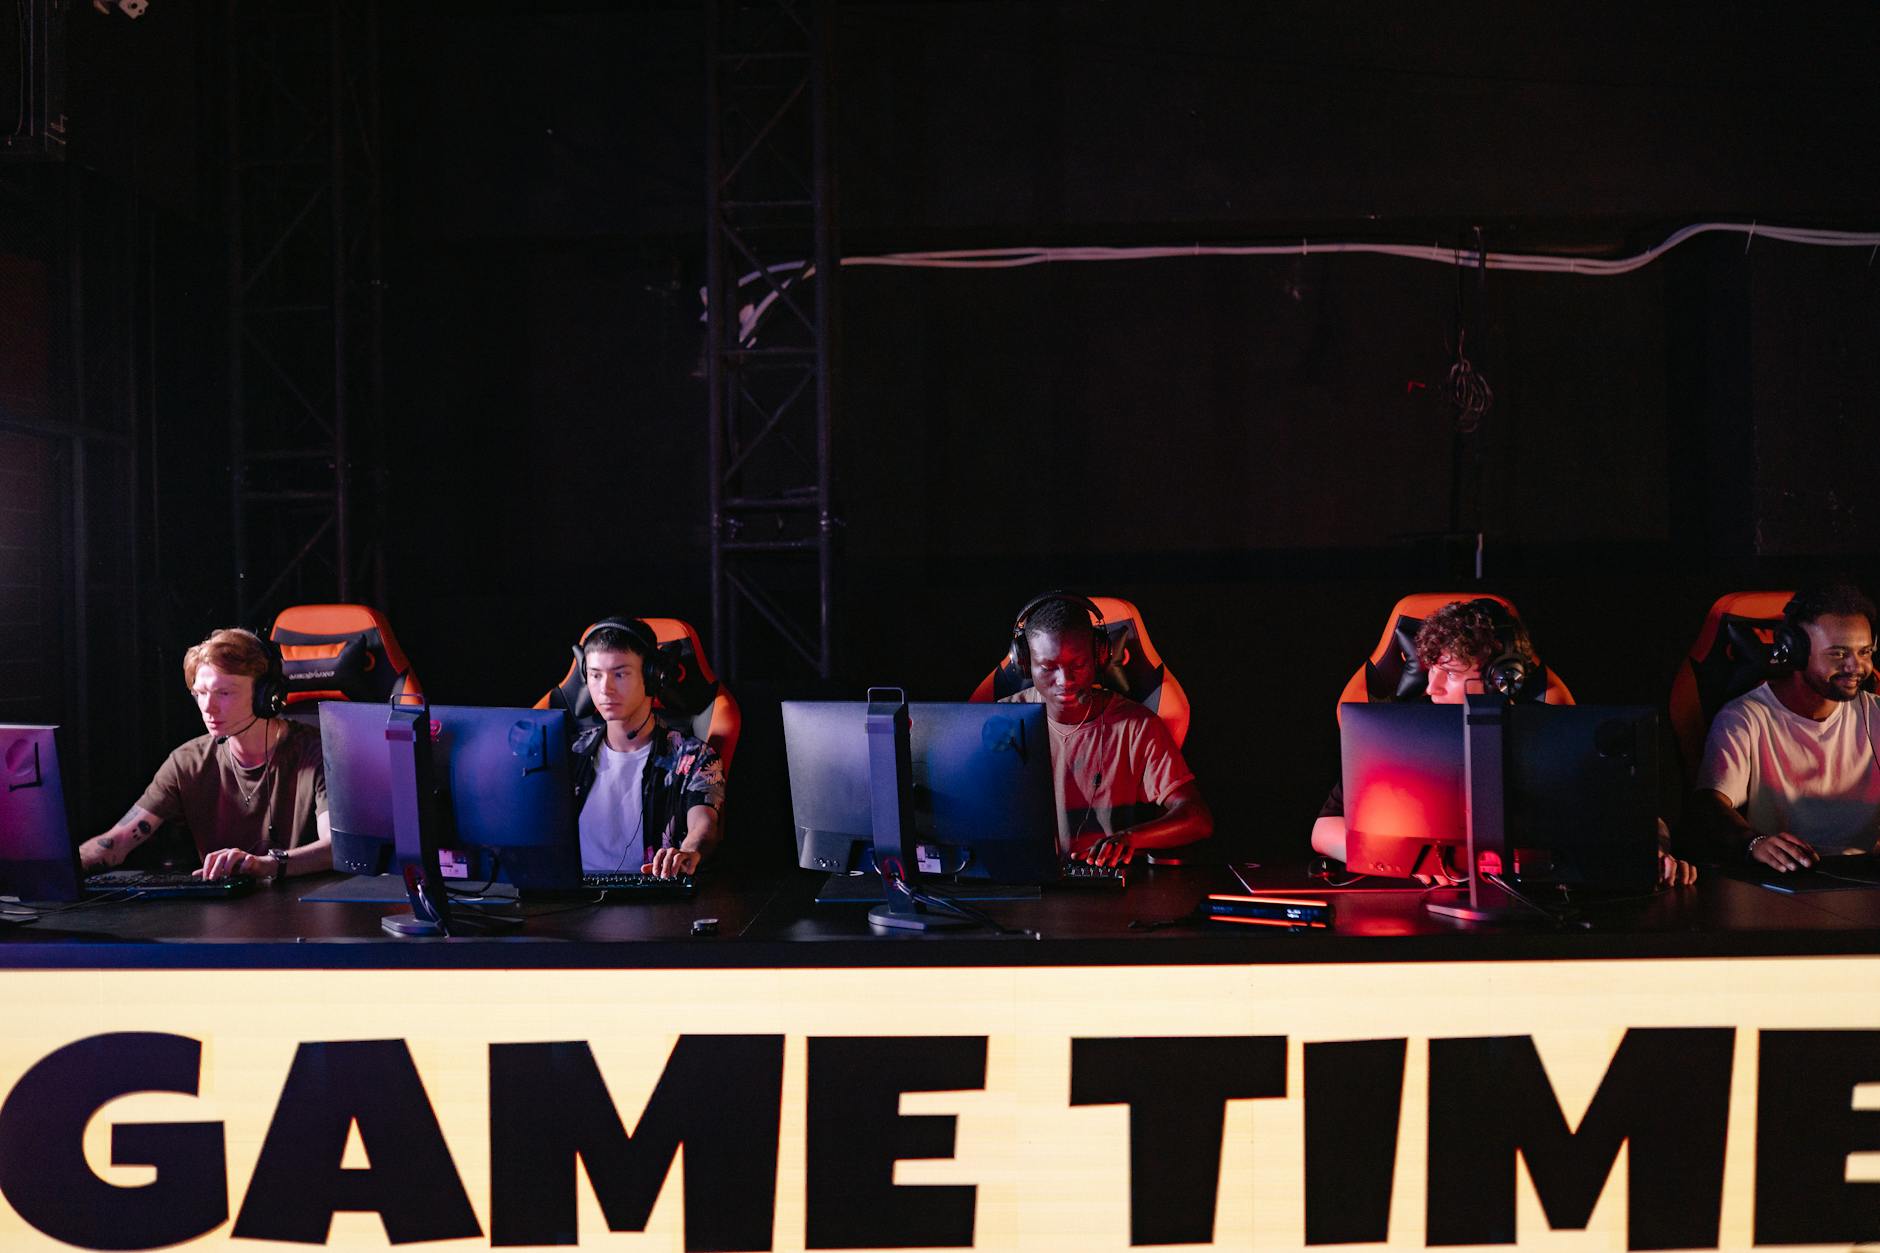 A Group of People Playing Online Games